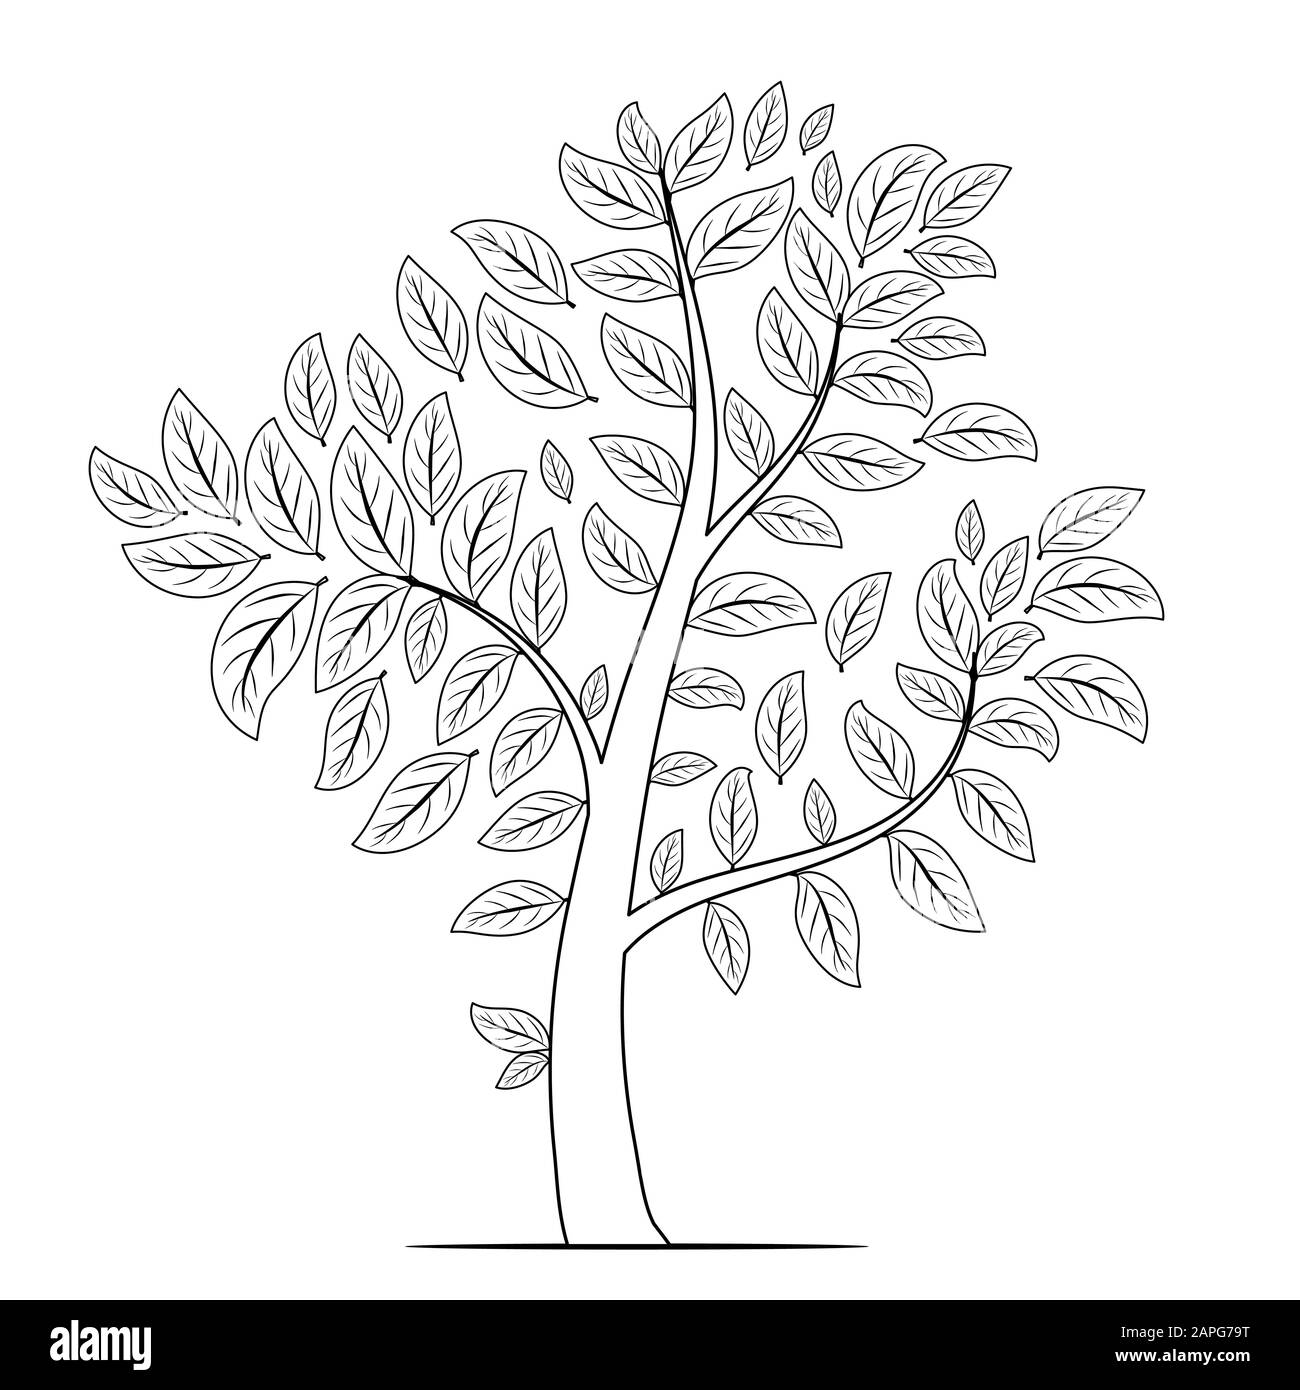 Tree with leaves silhouette on white background. Coloring book page vector Stock Vector